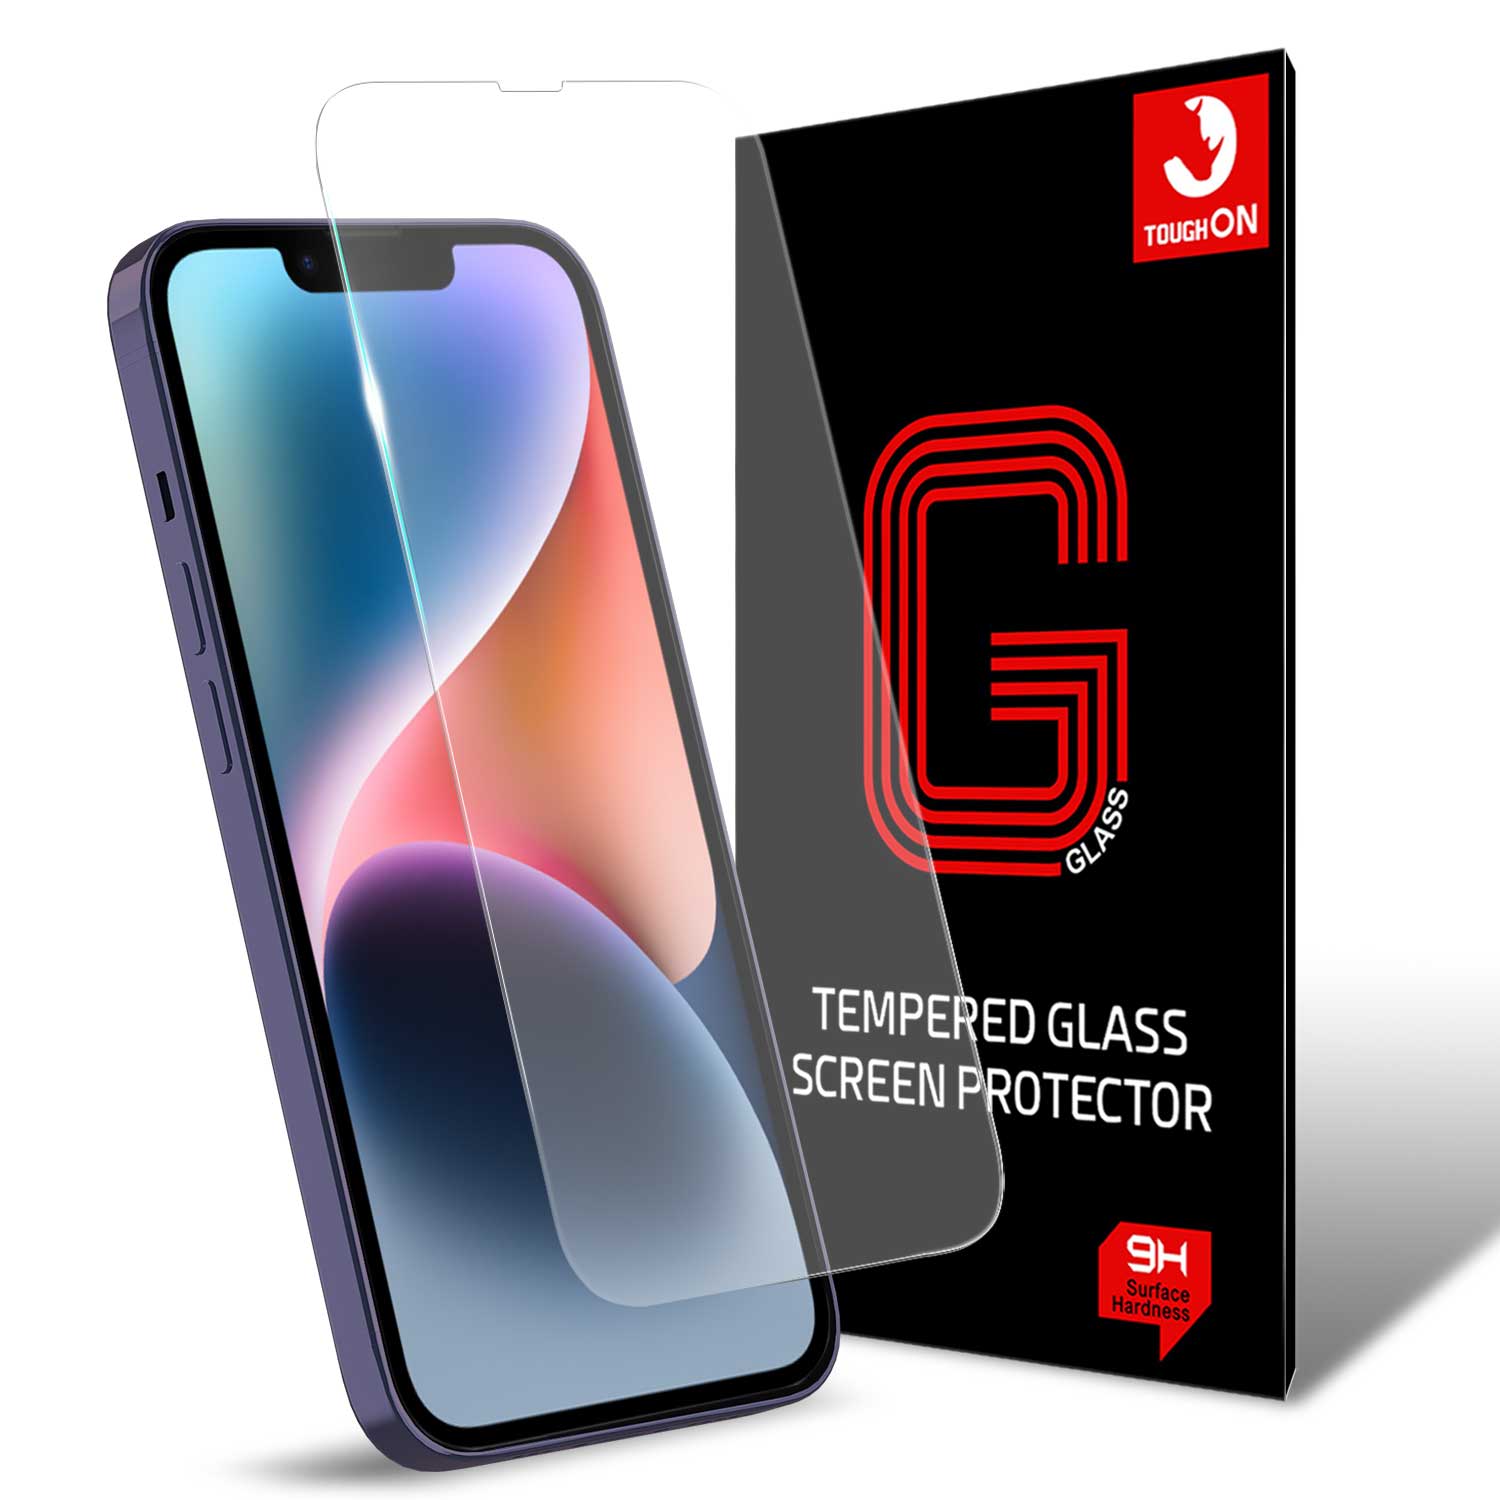 Tough On iPhone 14 Double-strong Tempered Glass Screen Protector Clear